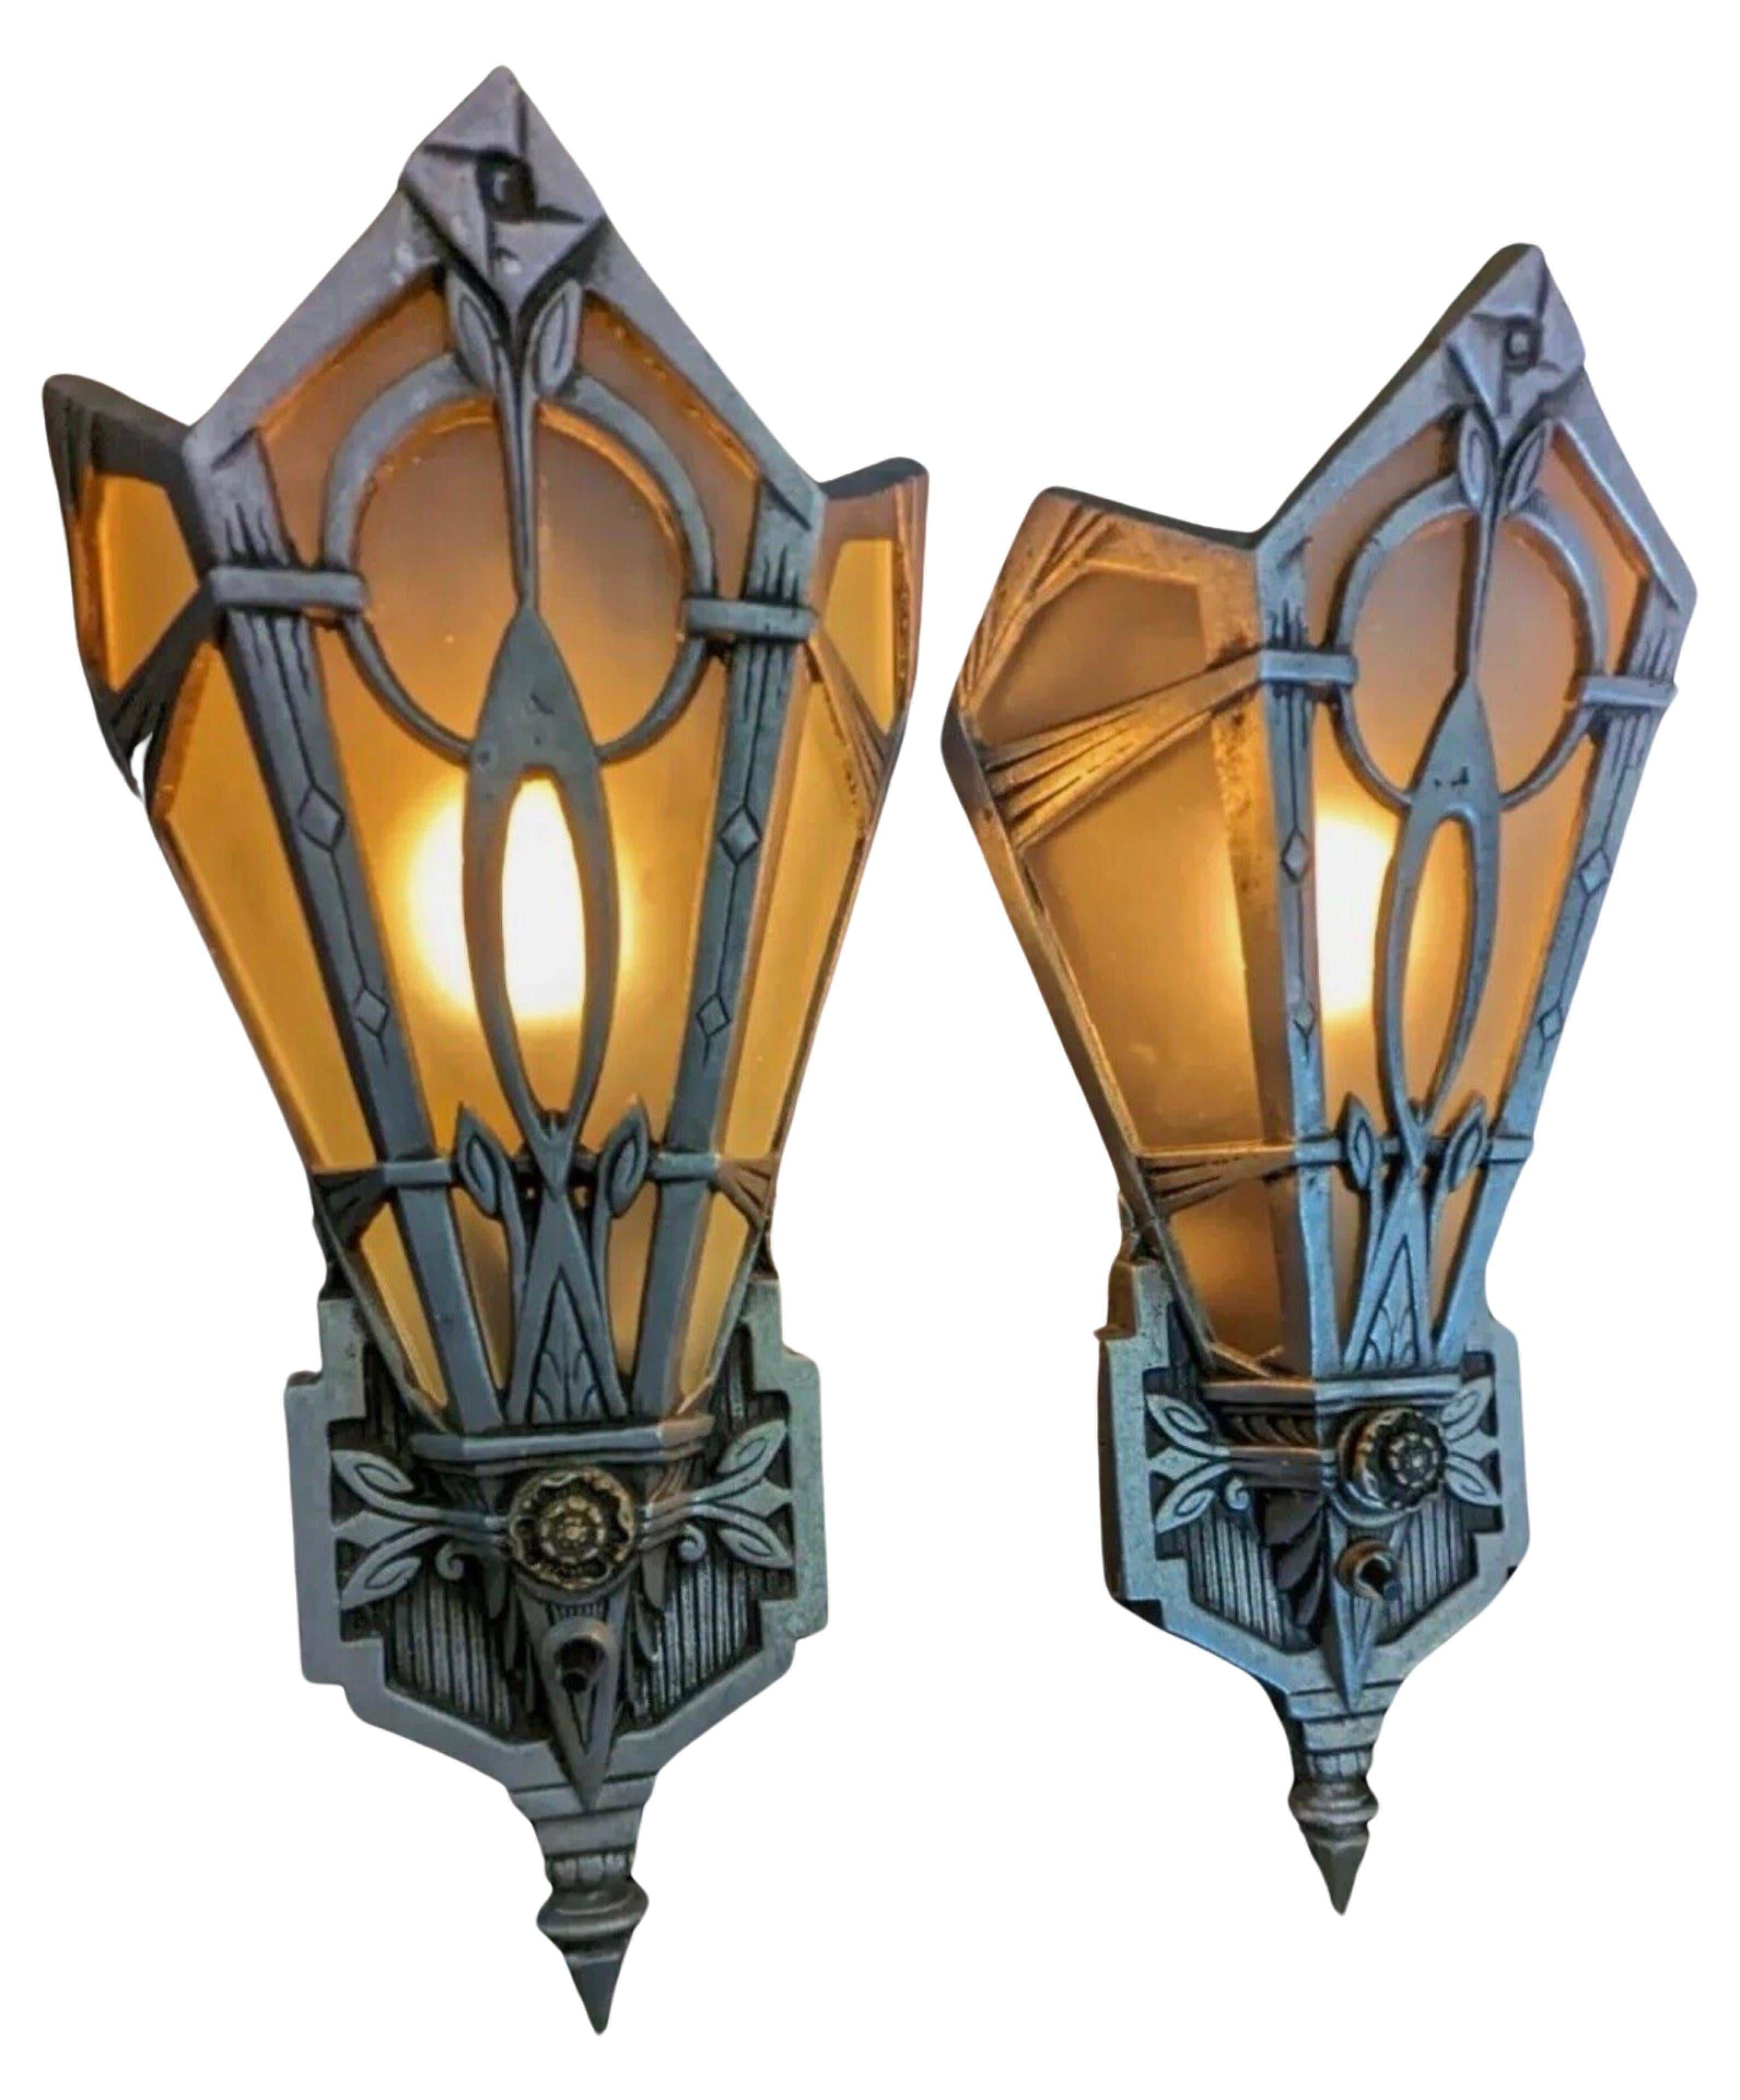 These original 1920′s aluminum Art Deco sconces boast unique design features characterized by symmetry and geometry. Salvaged from a historic theater in Detroit, these sconces are larger than typical ones but suitable for use in a home or office